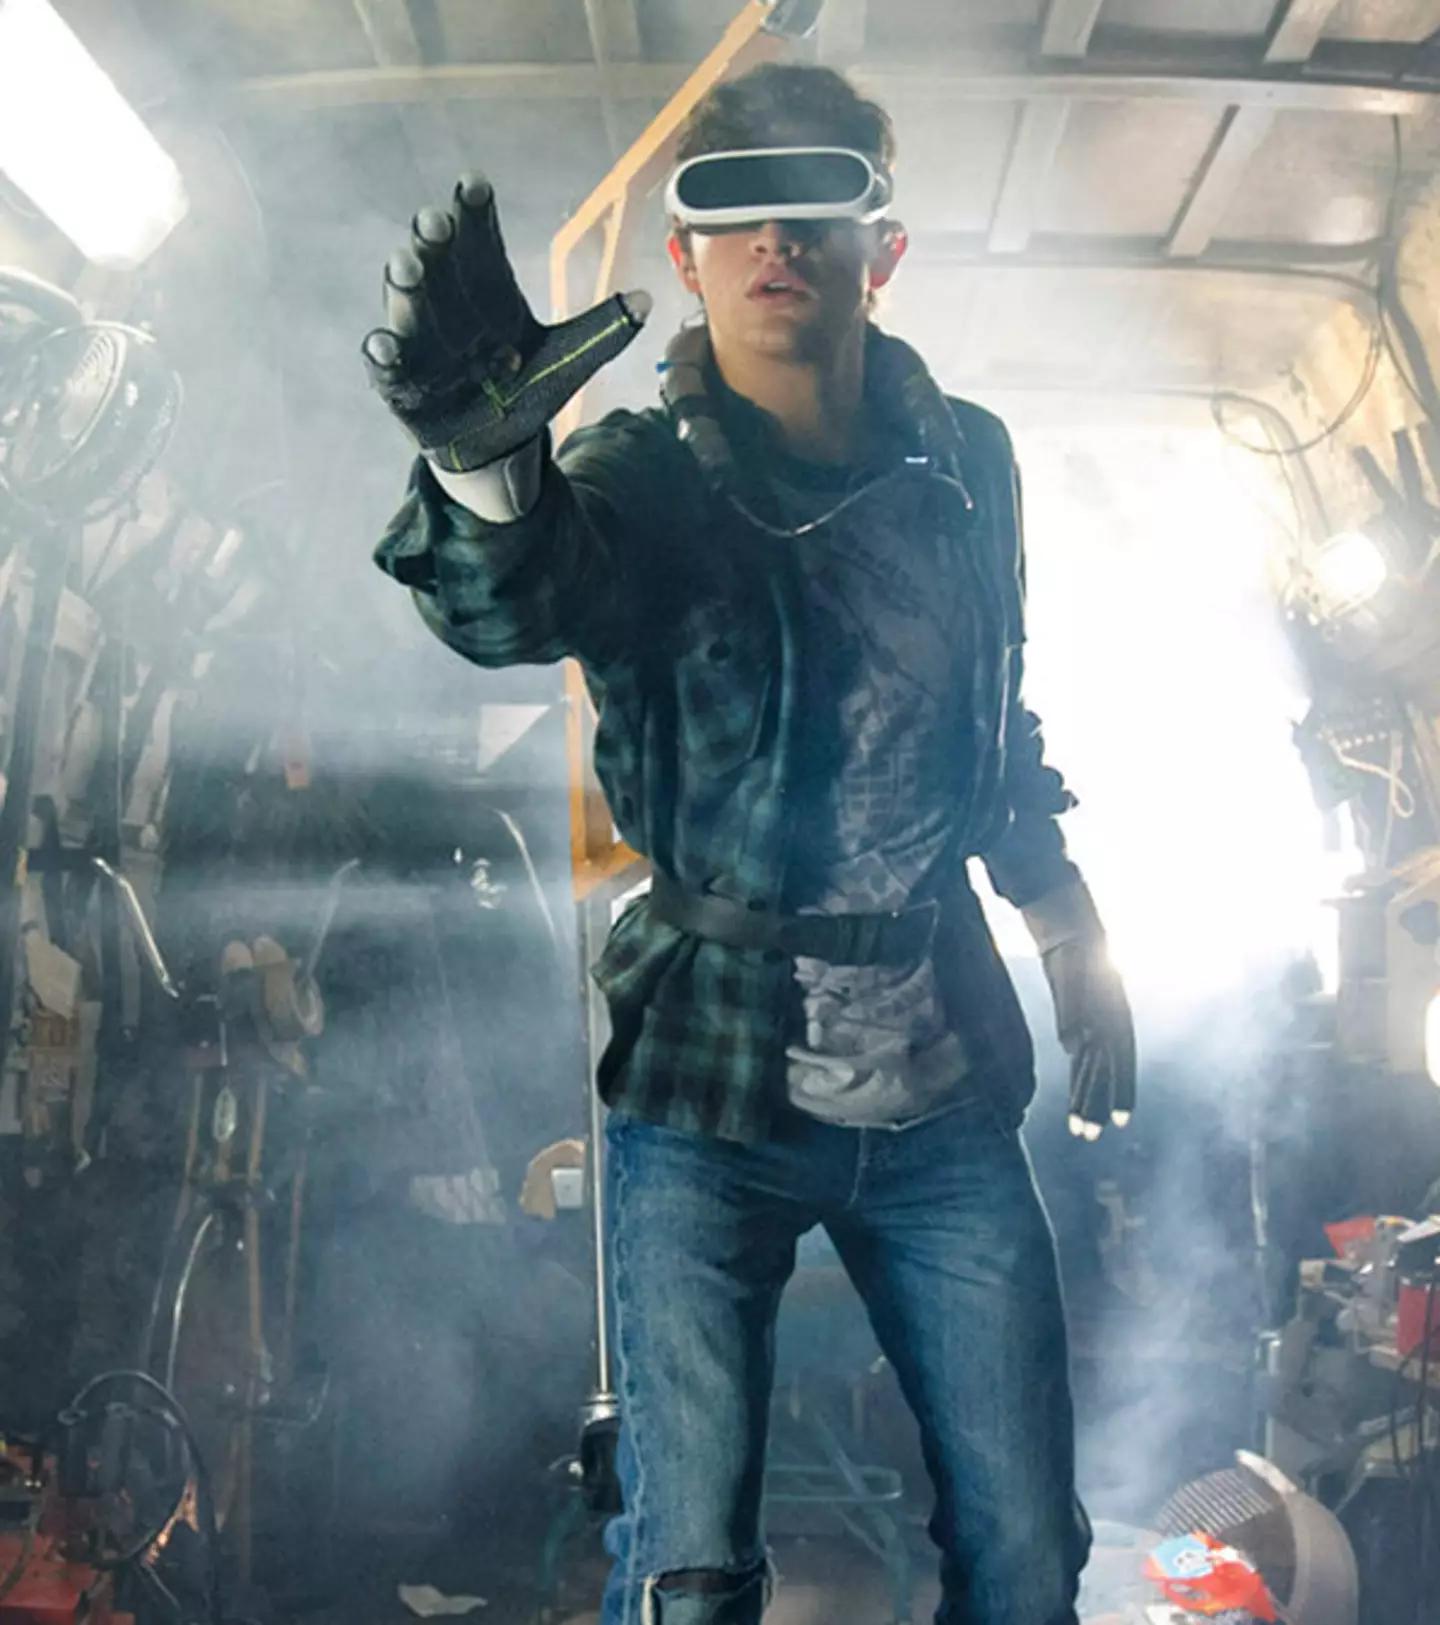 Web3 Watch: Ready Player One-style metaverse launches with Warner